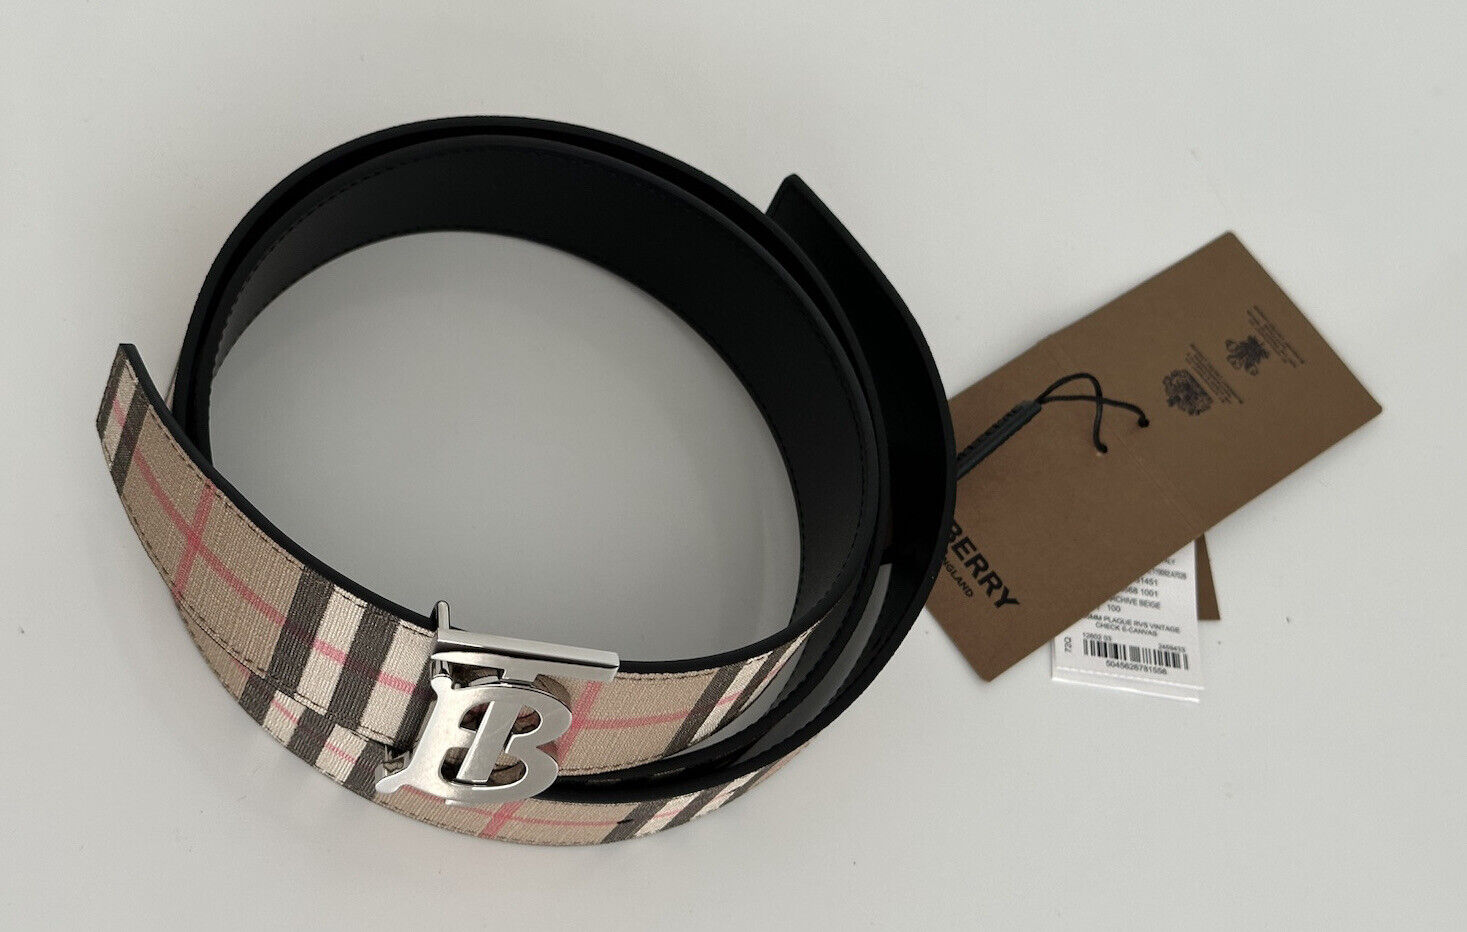 NWT $580 Burberry TB Leather Archive Beige Reversible Belt 40/100 8046568 Italy